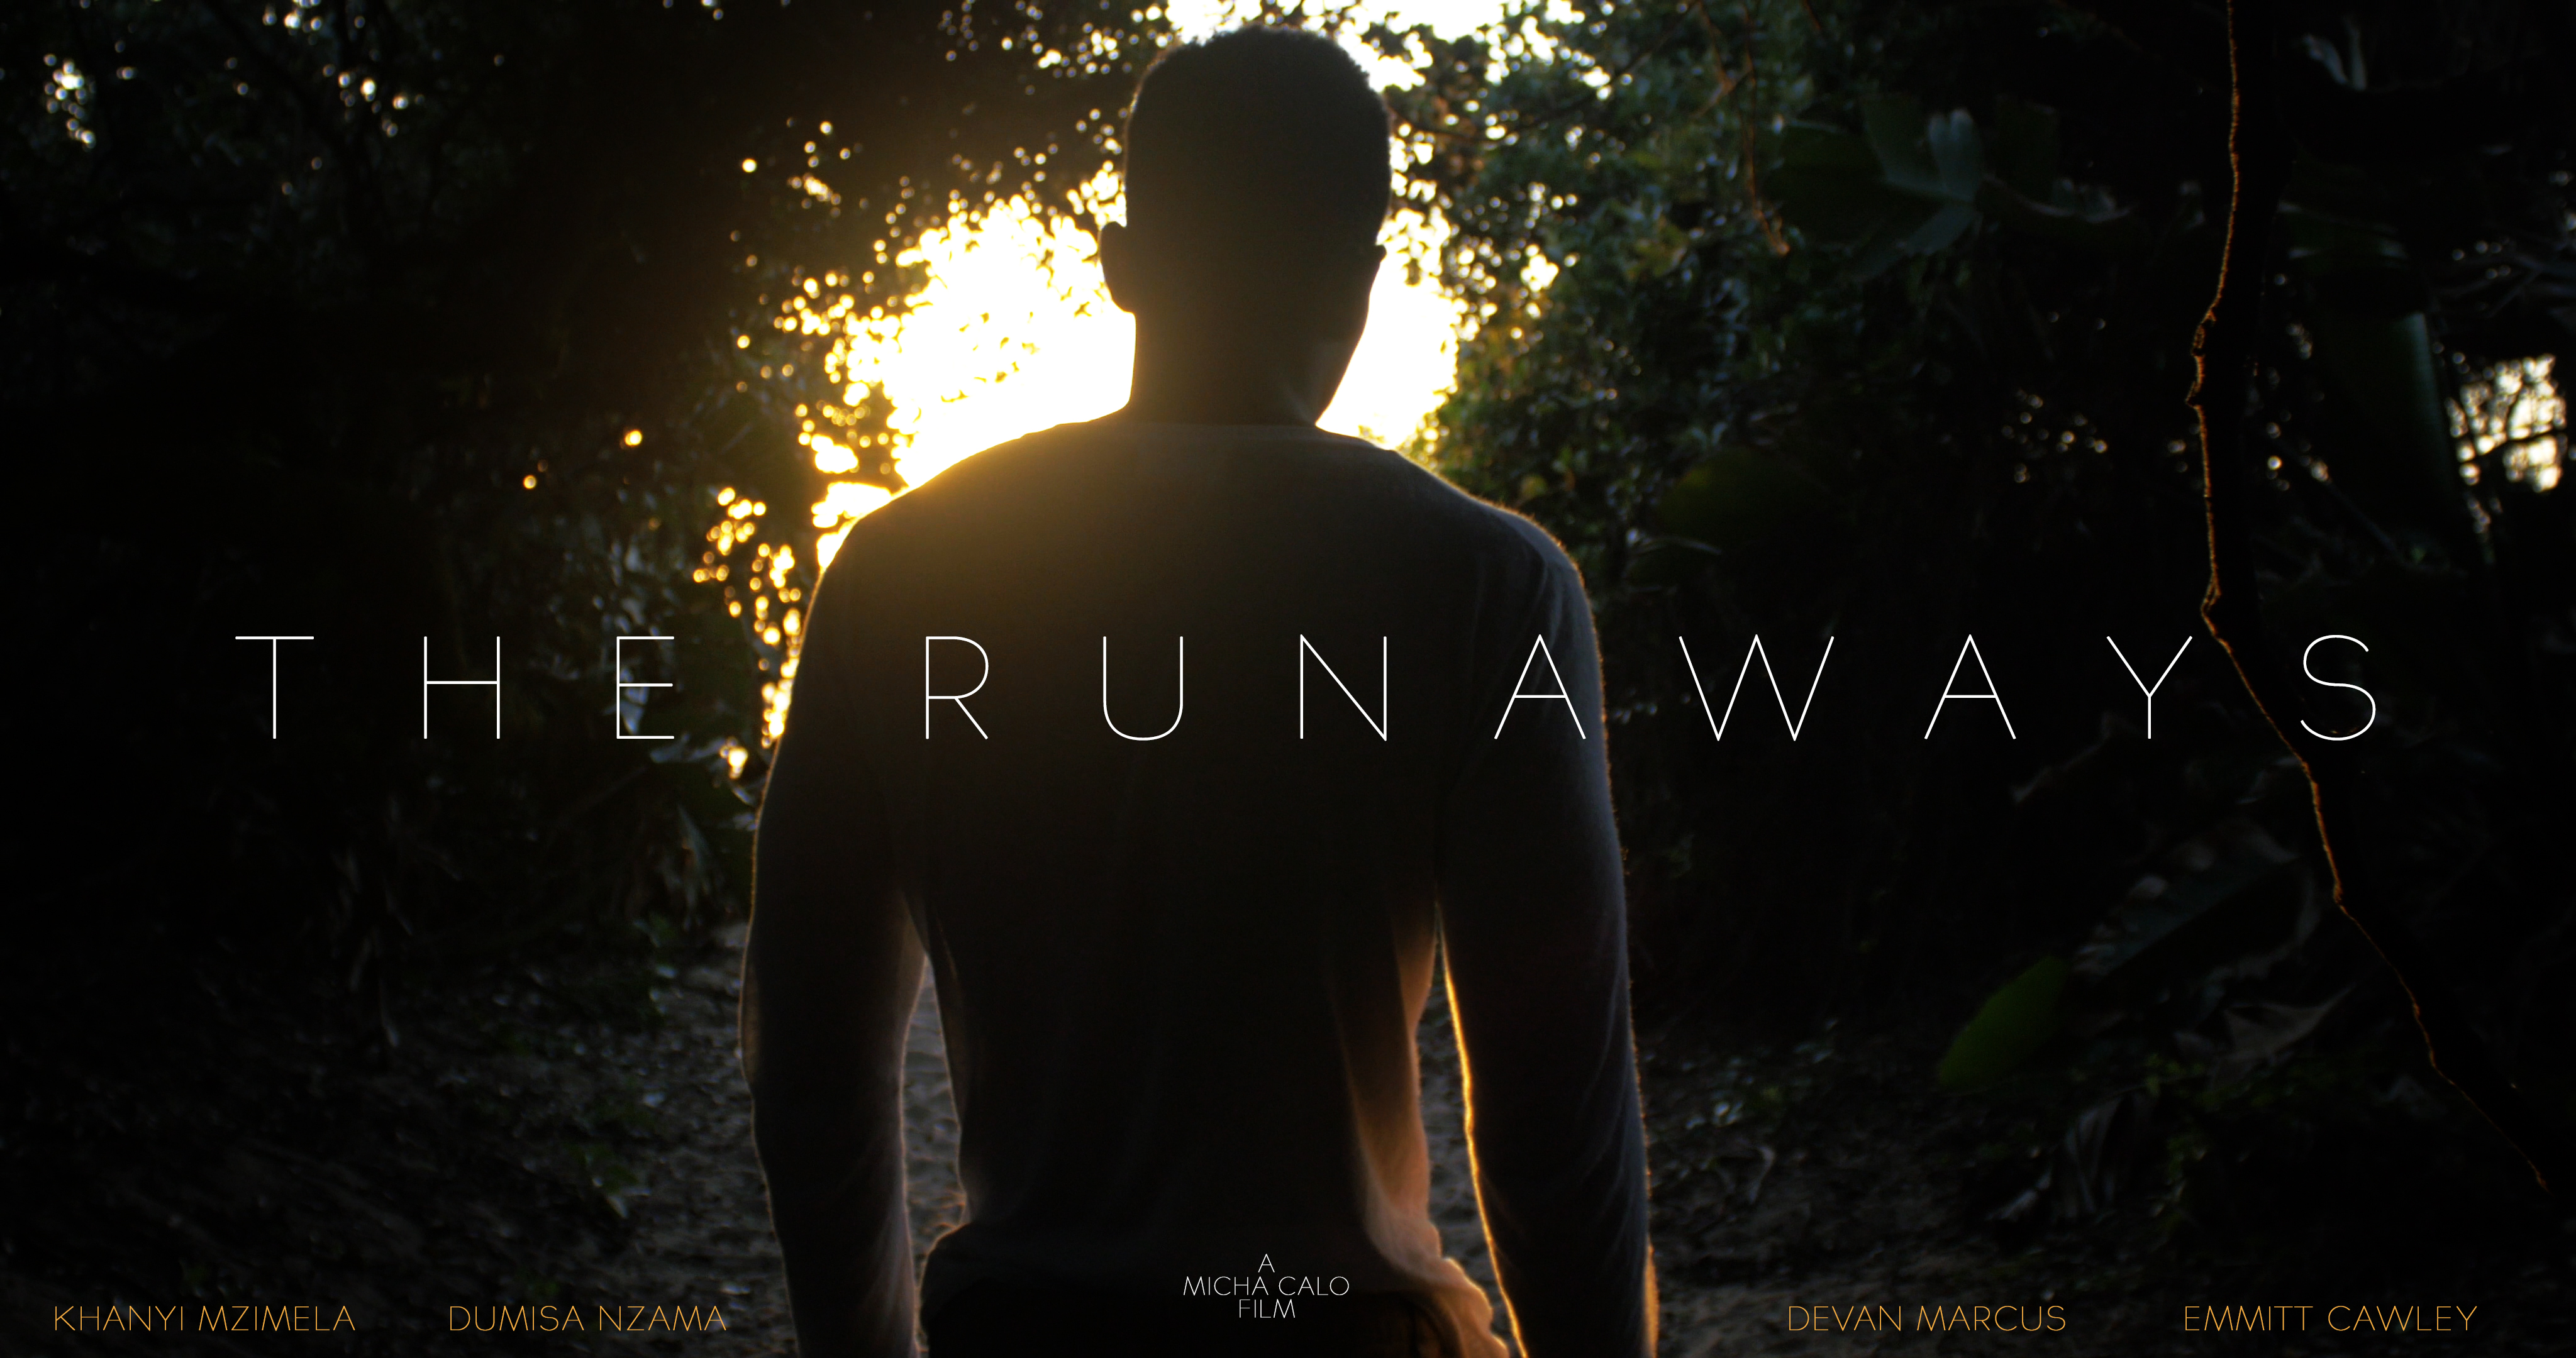 THE RUNAWAYS Short Film Directed by Micha Calo